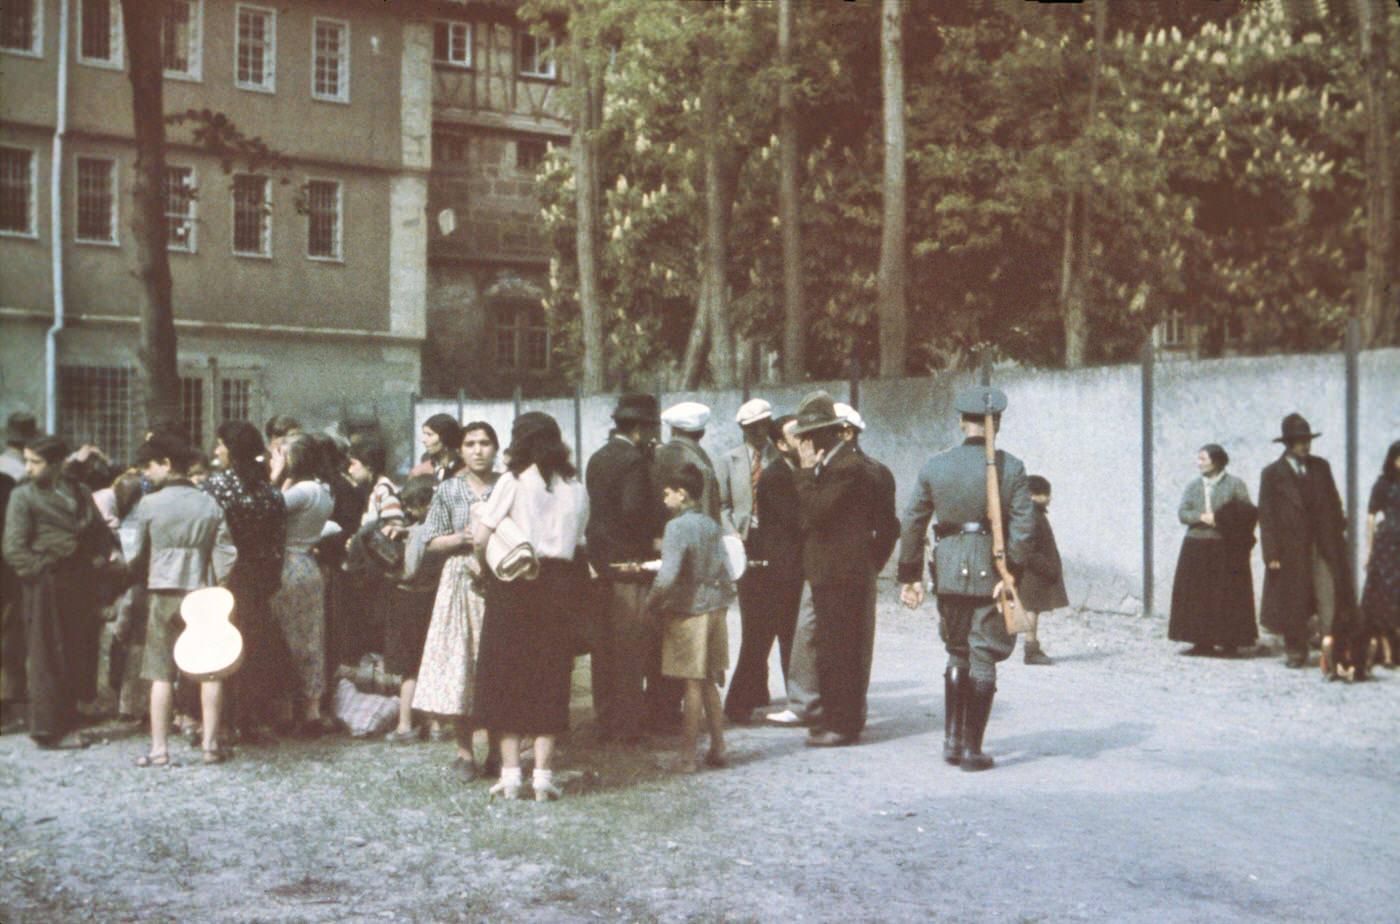 Sinti in the courtyard of Hohenasperg prison prior to deportation to a camp in Poland, May 22, 1940.